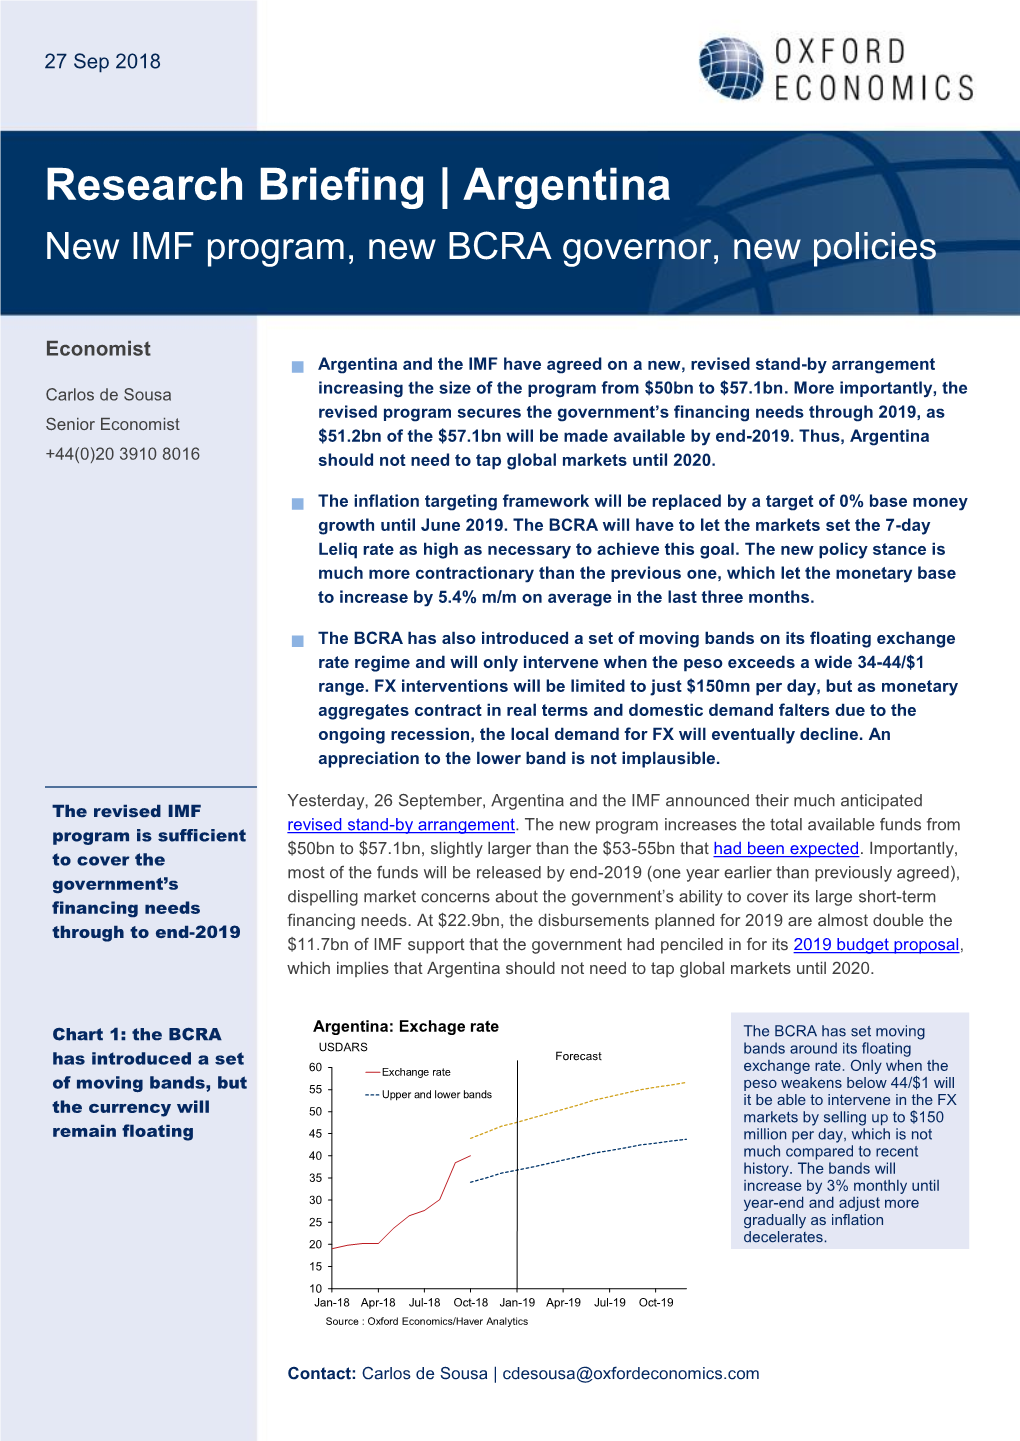 New IMF Program, New BCRA Governor, New Policies